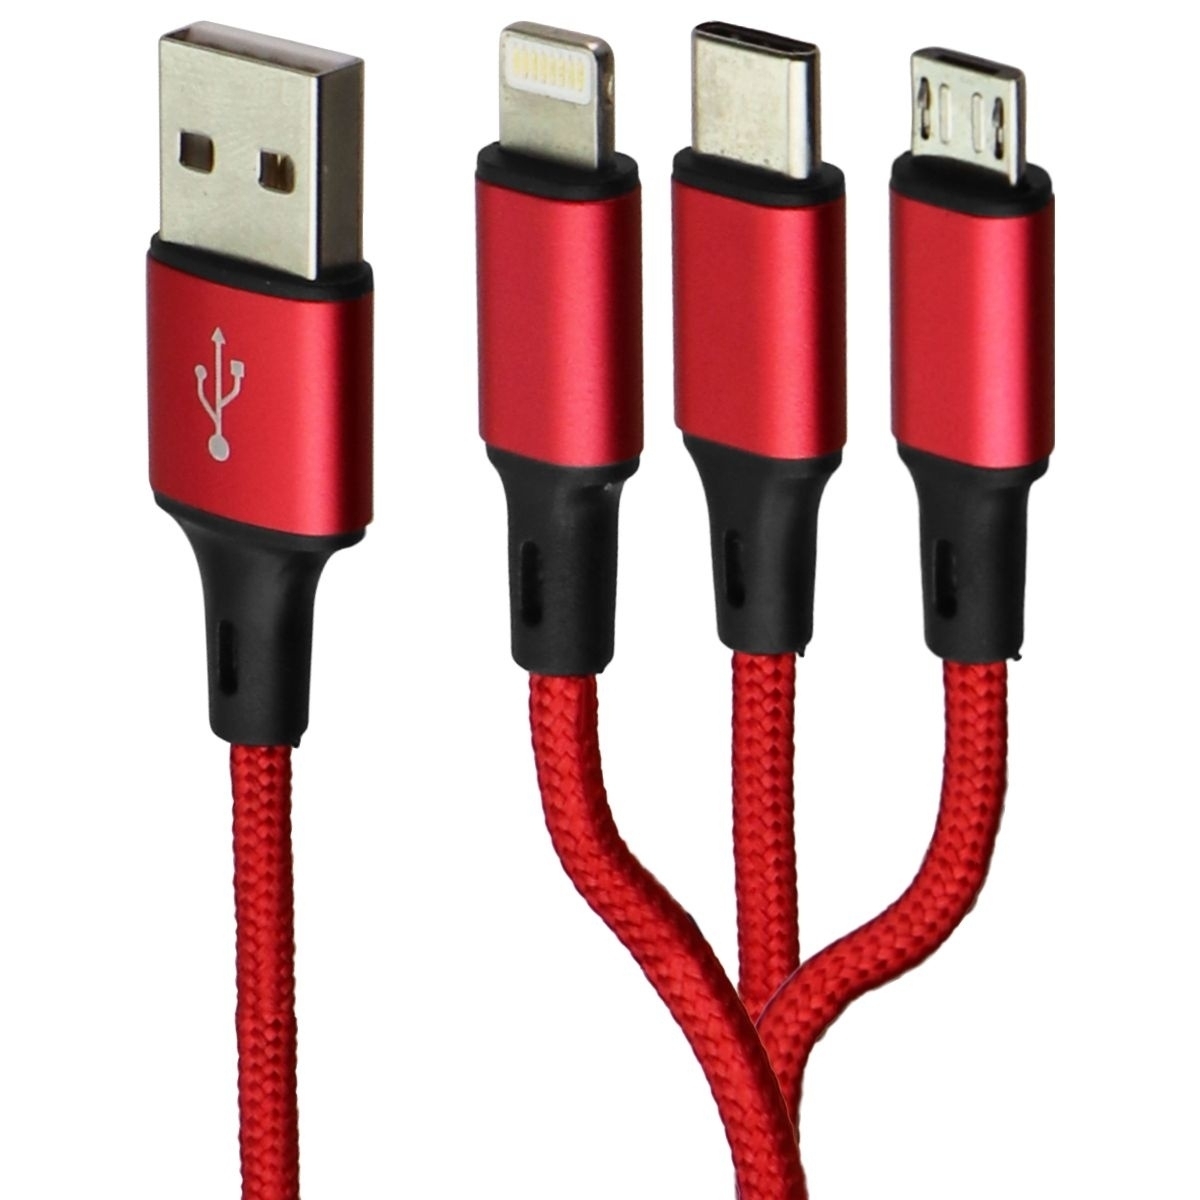 Zoda 3-in-1 USB-C/Lightning 8-Pin/Micro USB Braided Cable (4FT) - Red